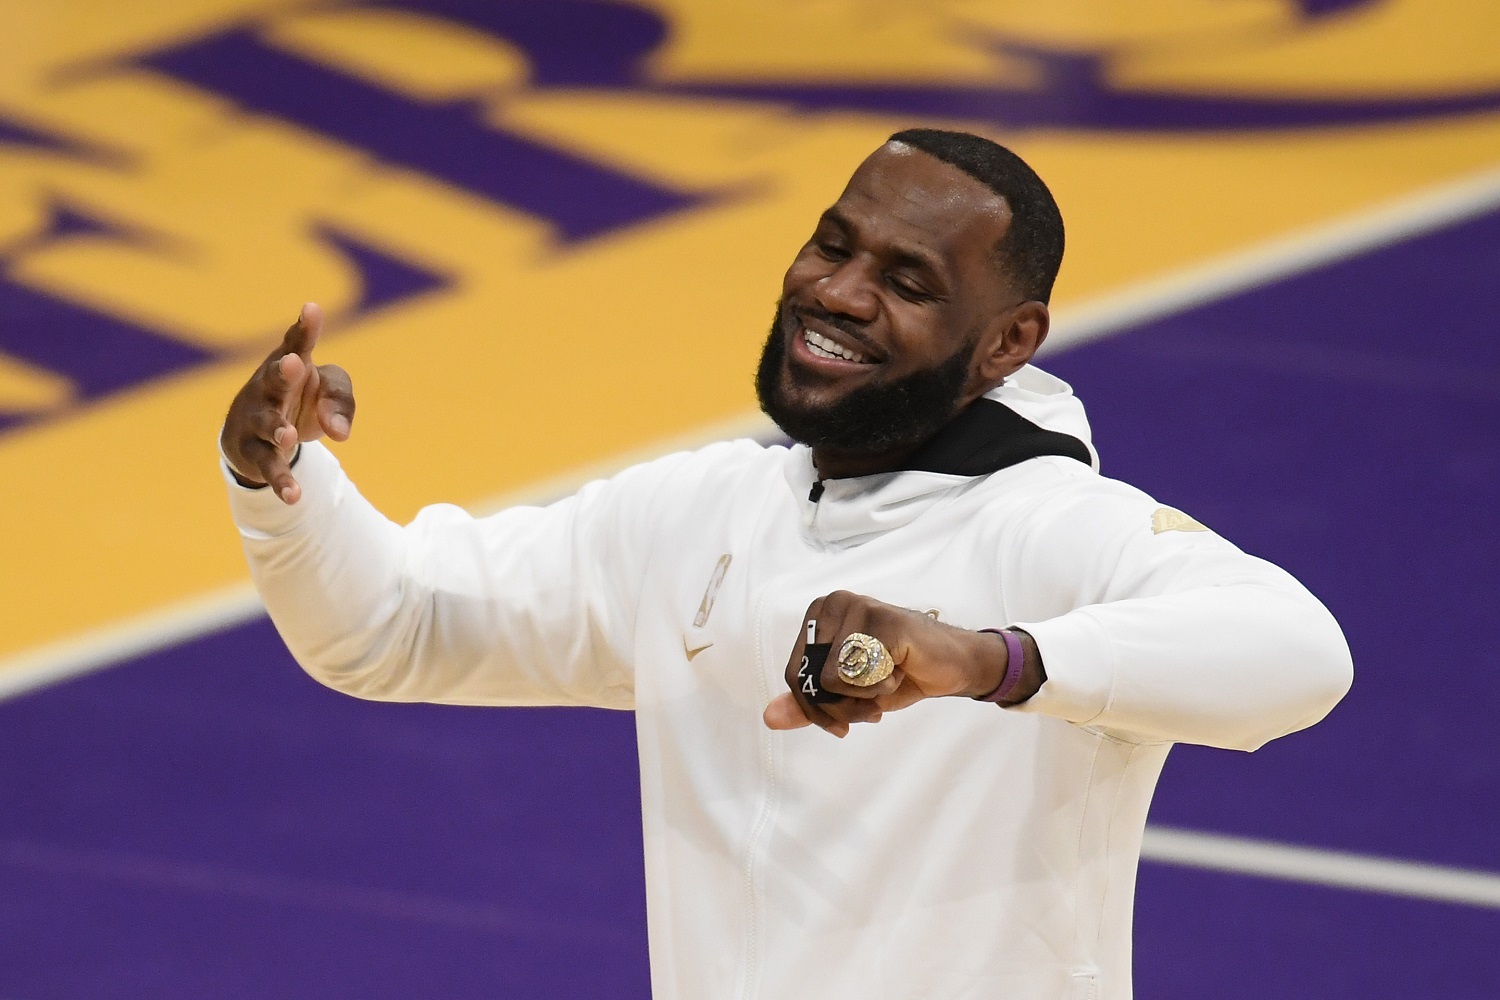 The La Lakers 2020 Nba Championship Rings Are The Most Expensive In History 2